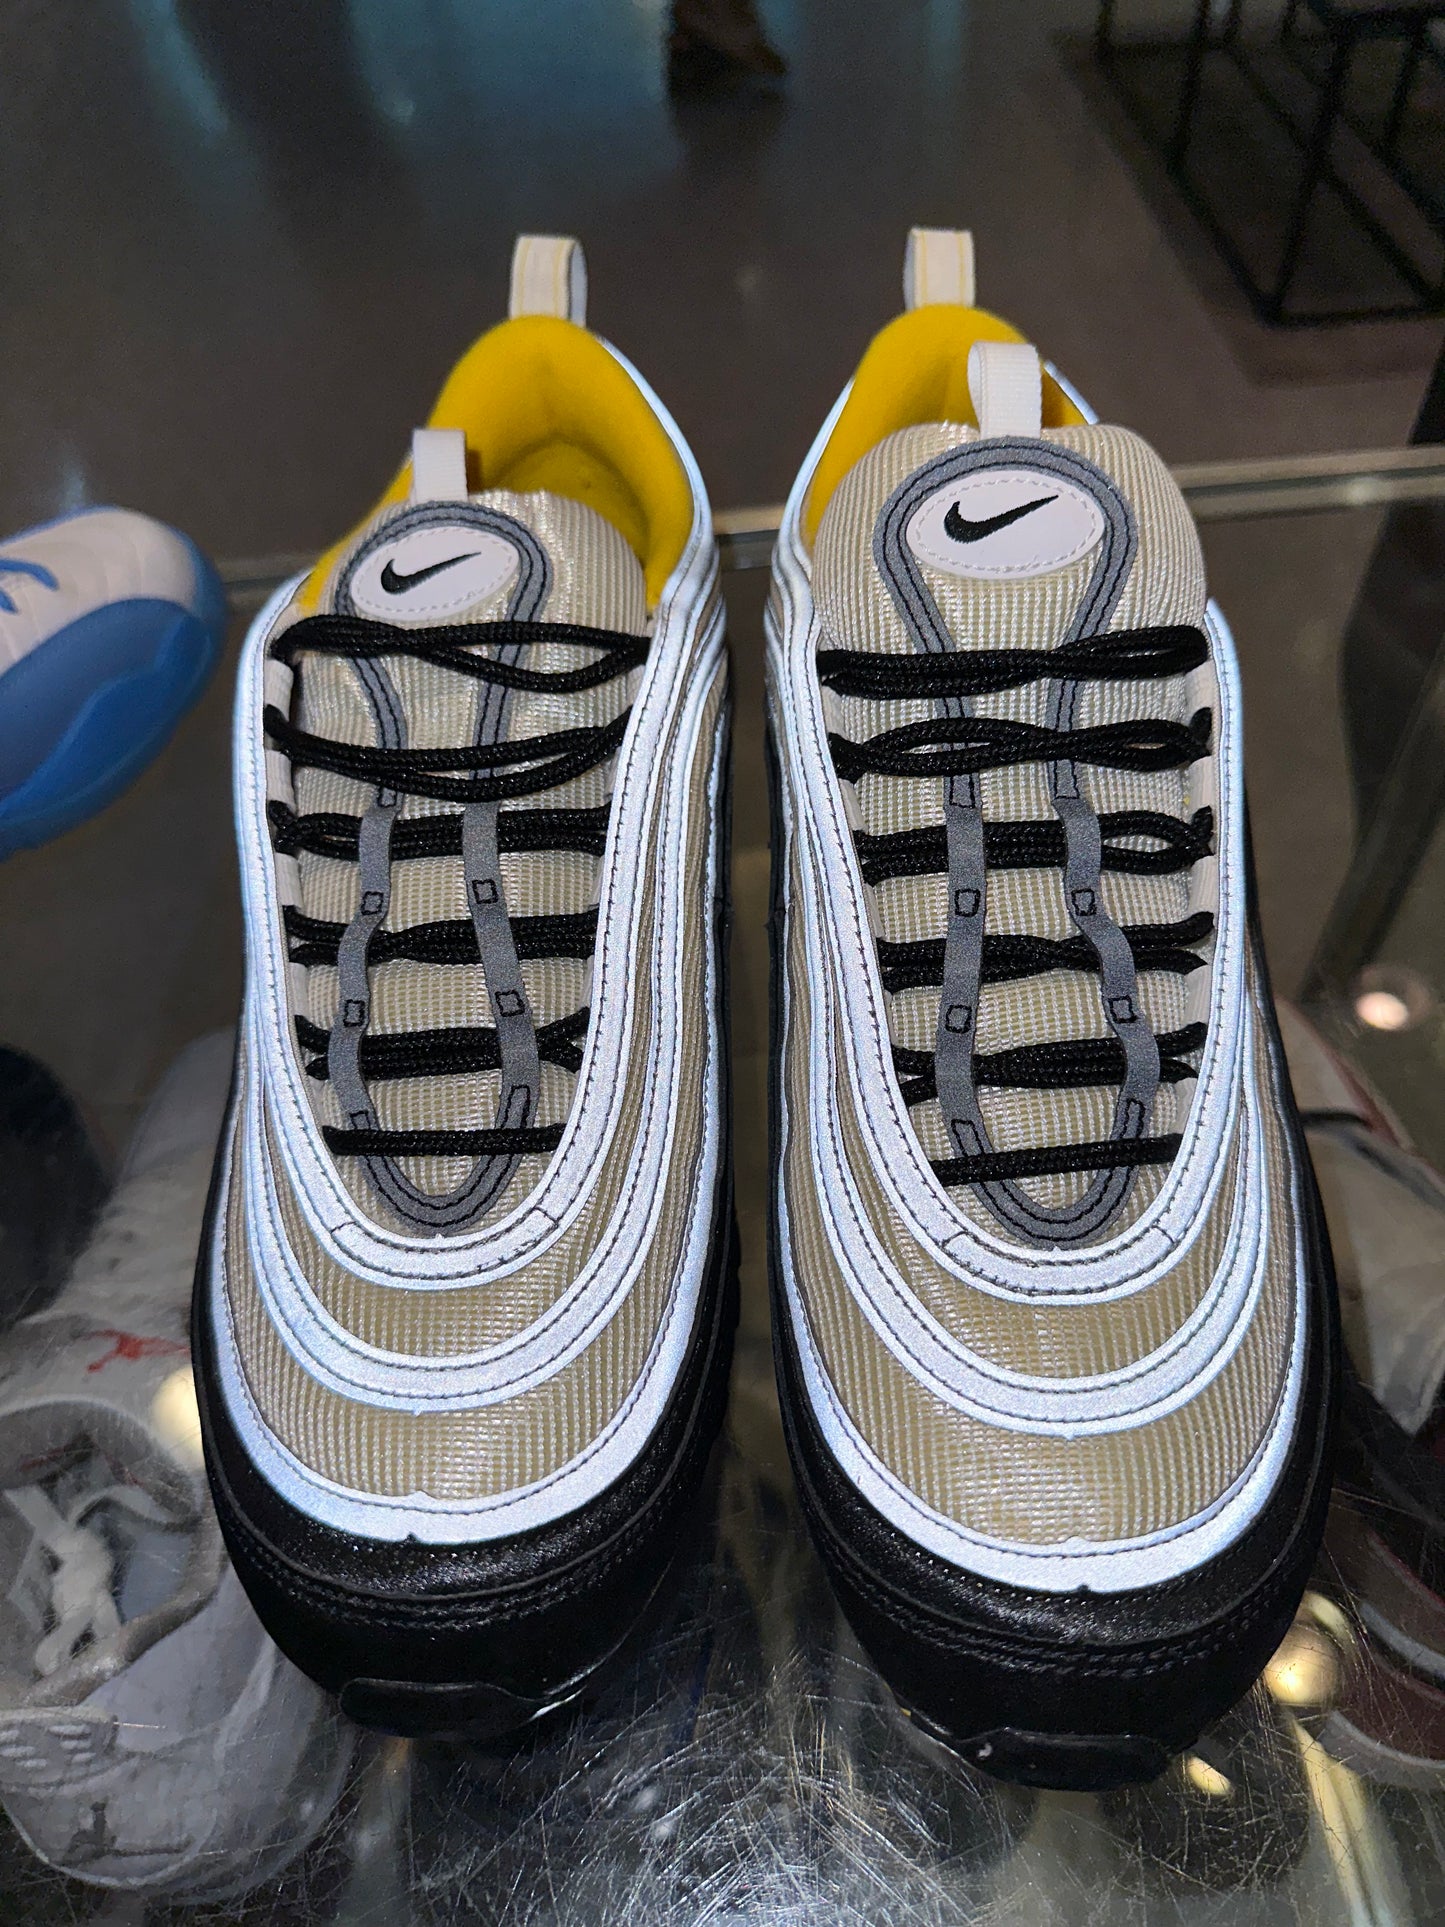 Size 11 Air Max 97 “Steelers” (Mall)